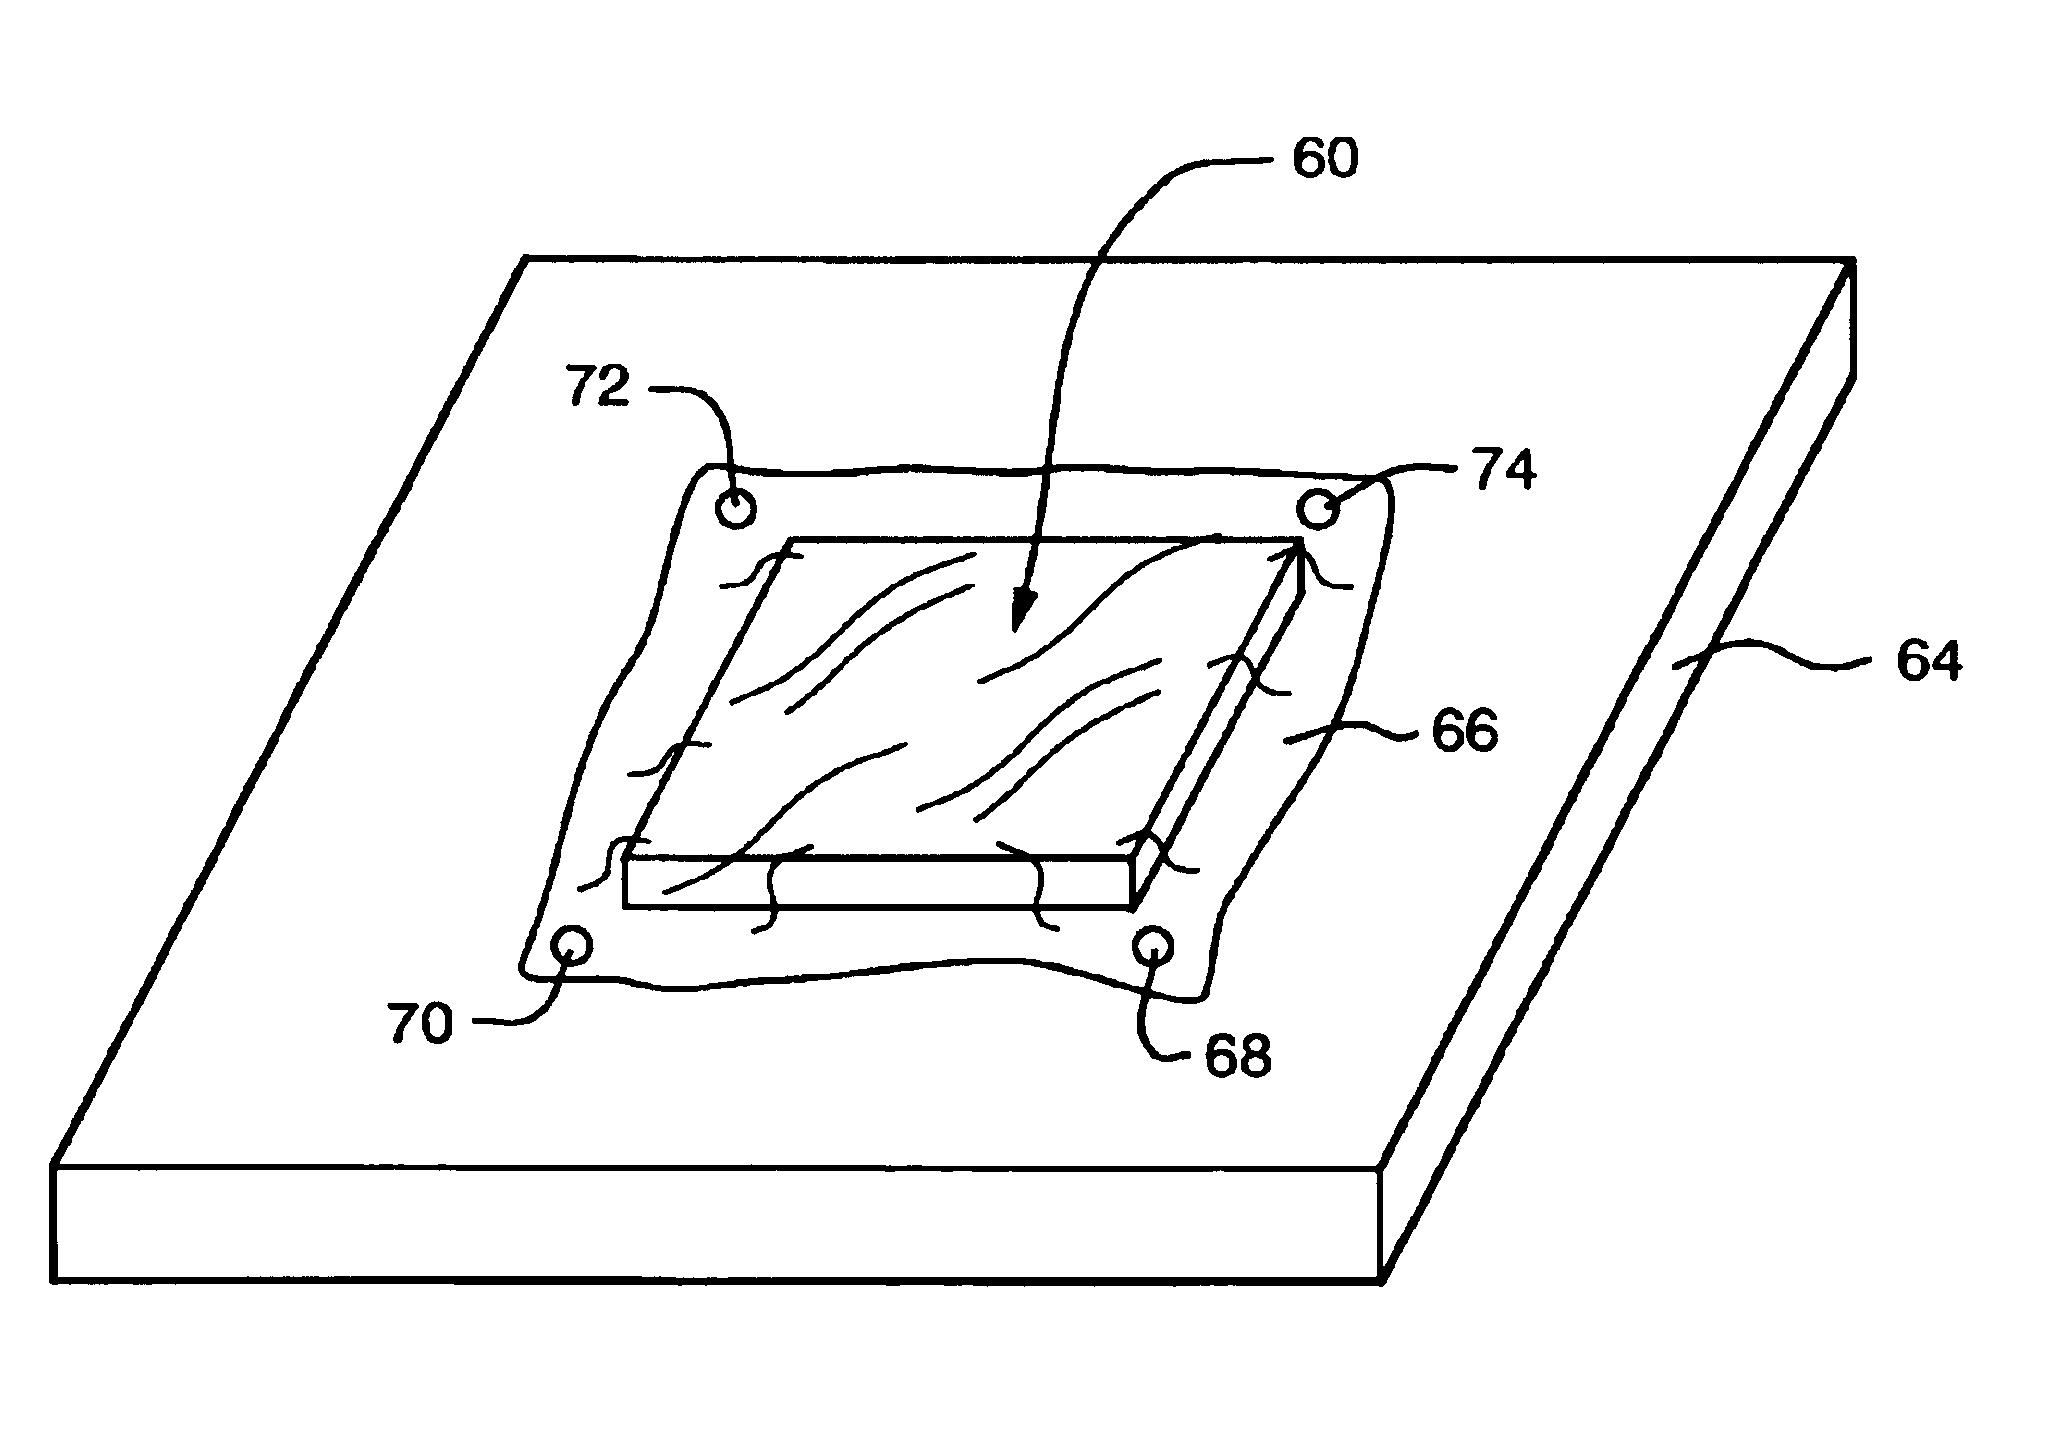 Enclosed fuel cell system and related method